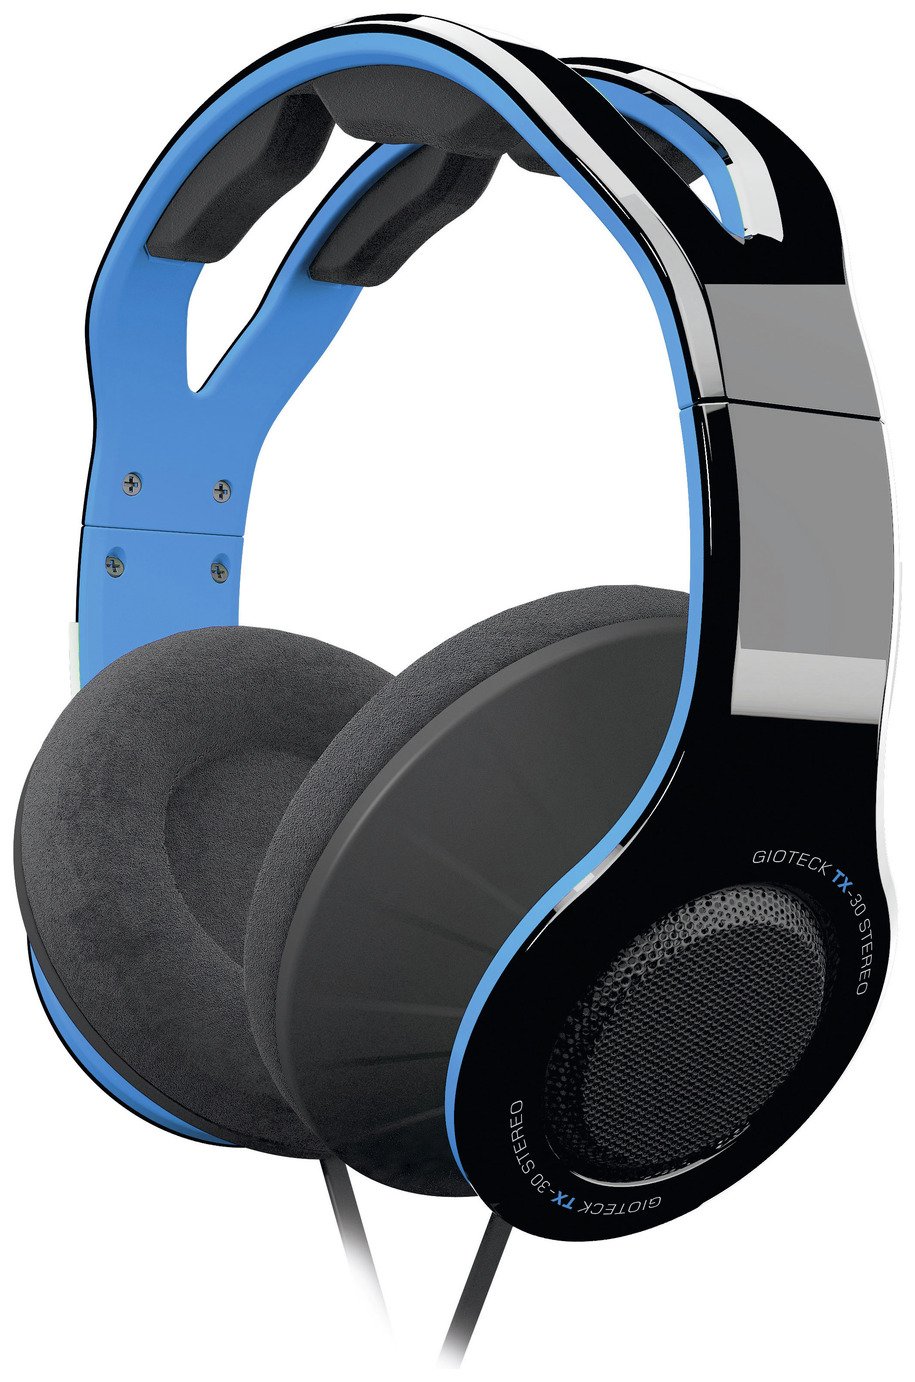 $30 ps4 headset